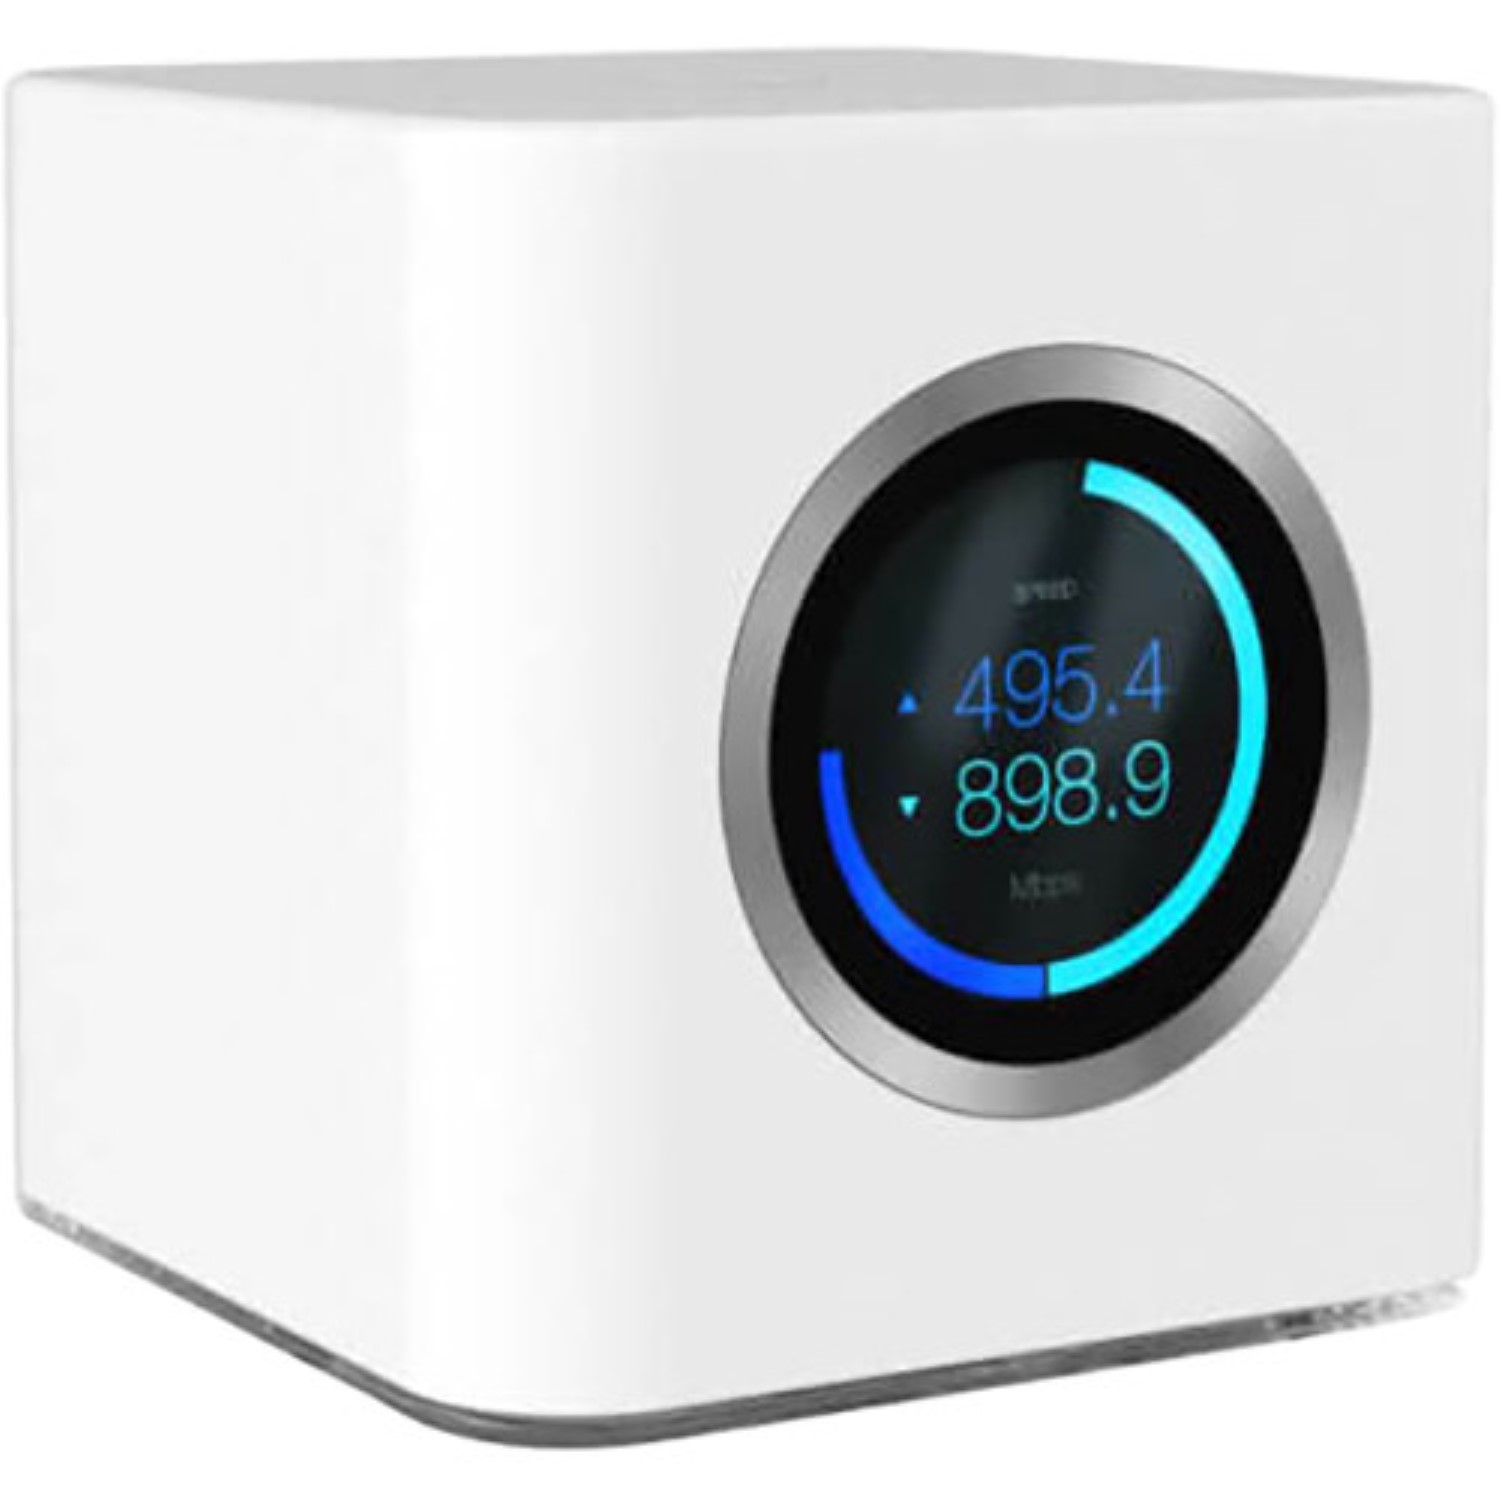 AmpliFi Home Wi-Fi System - image 3 of 5